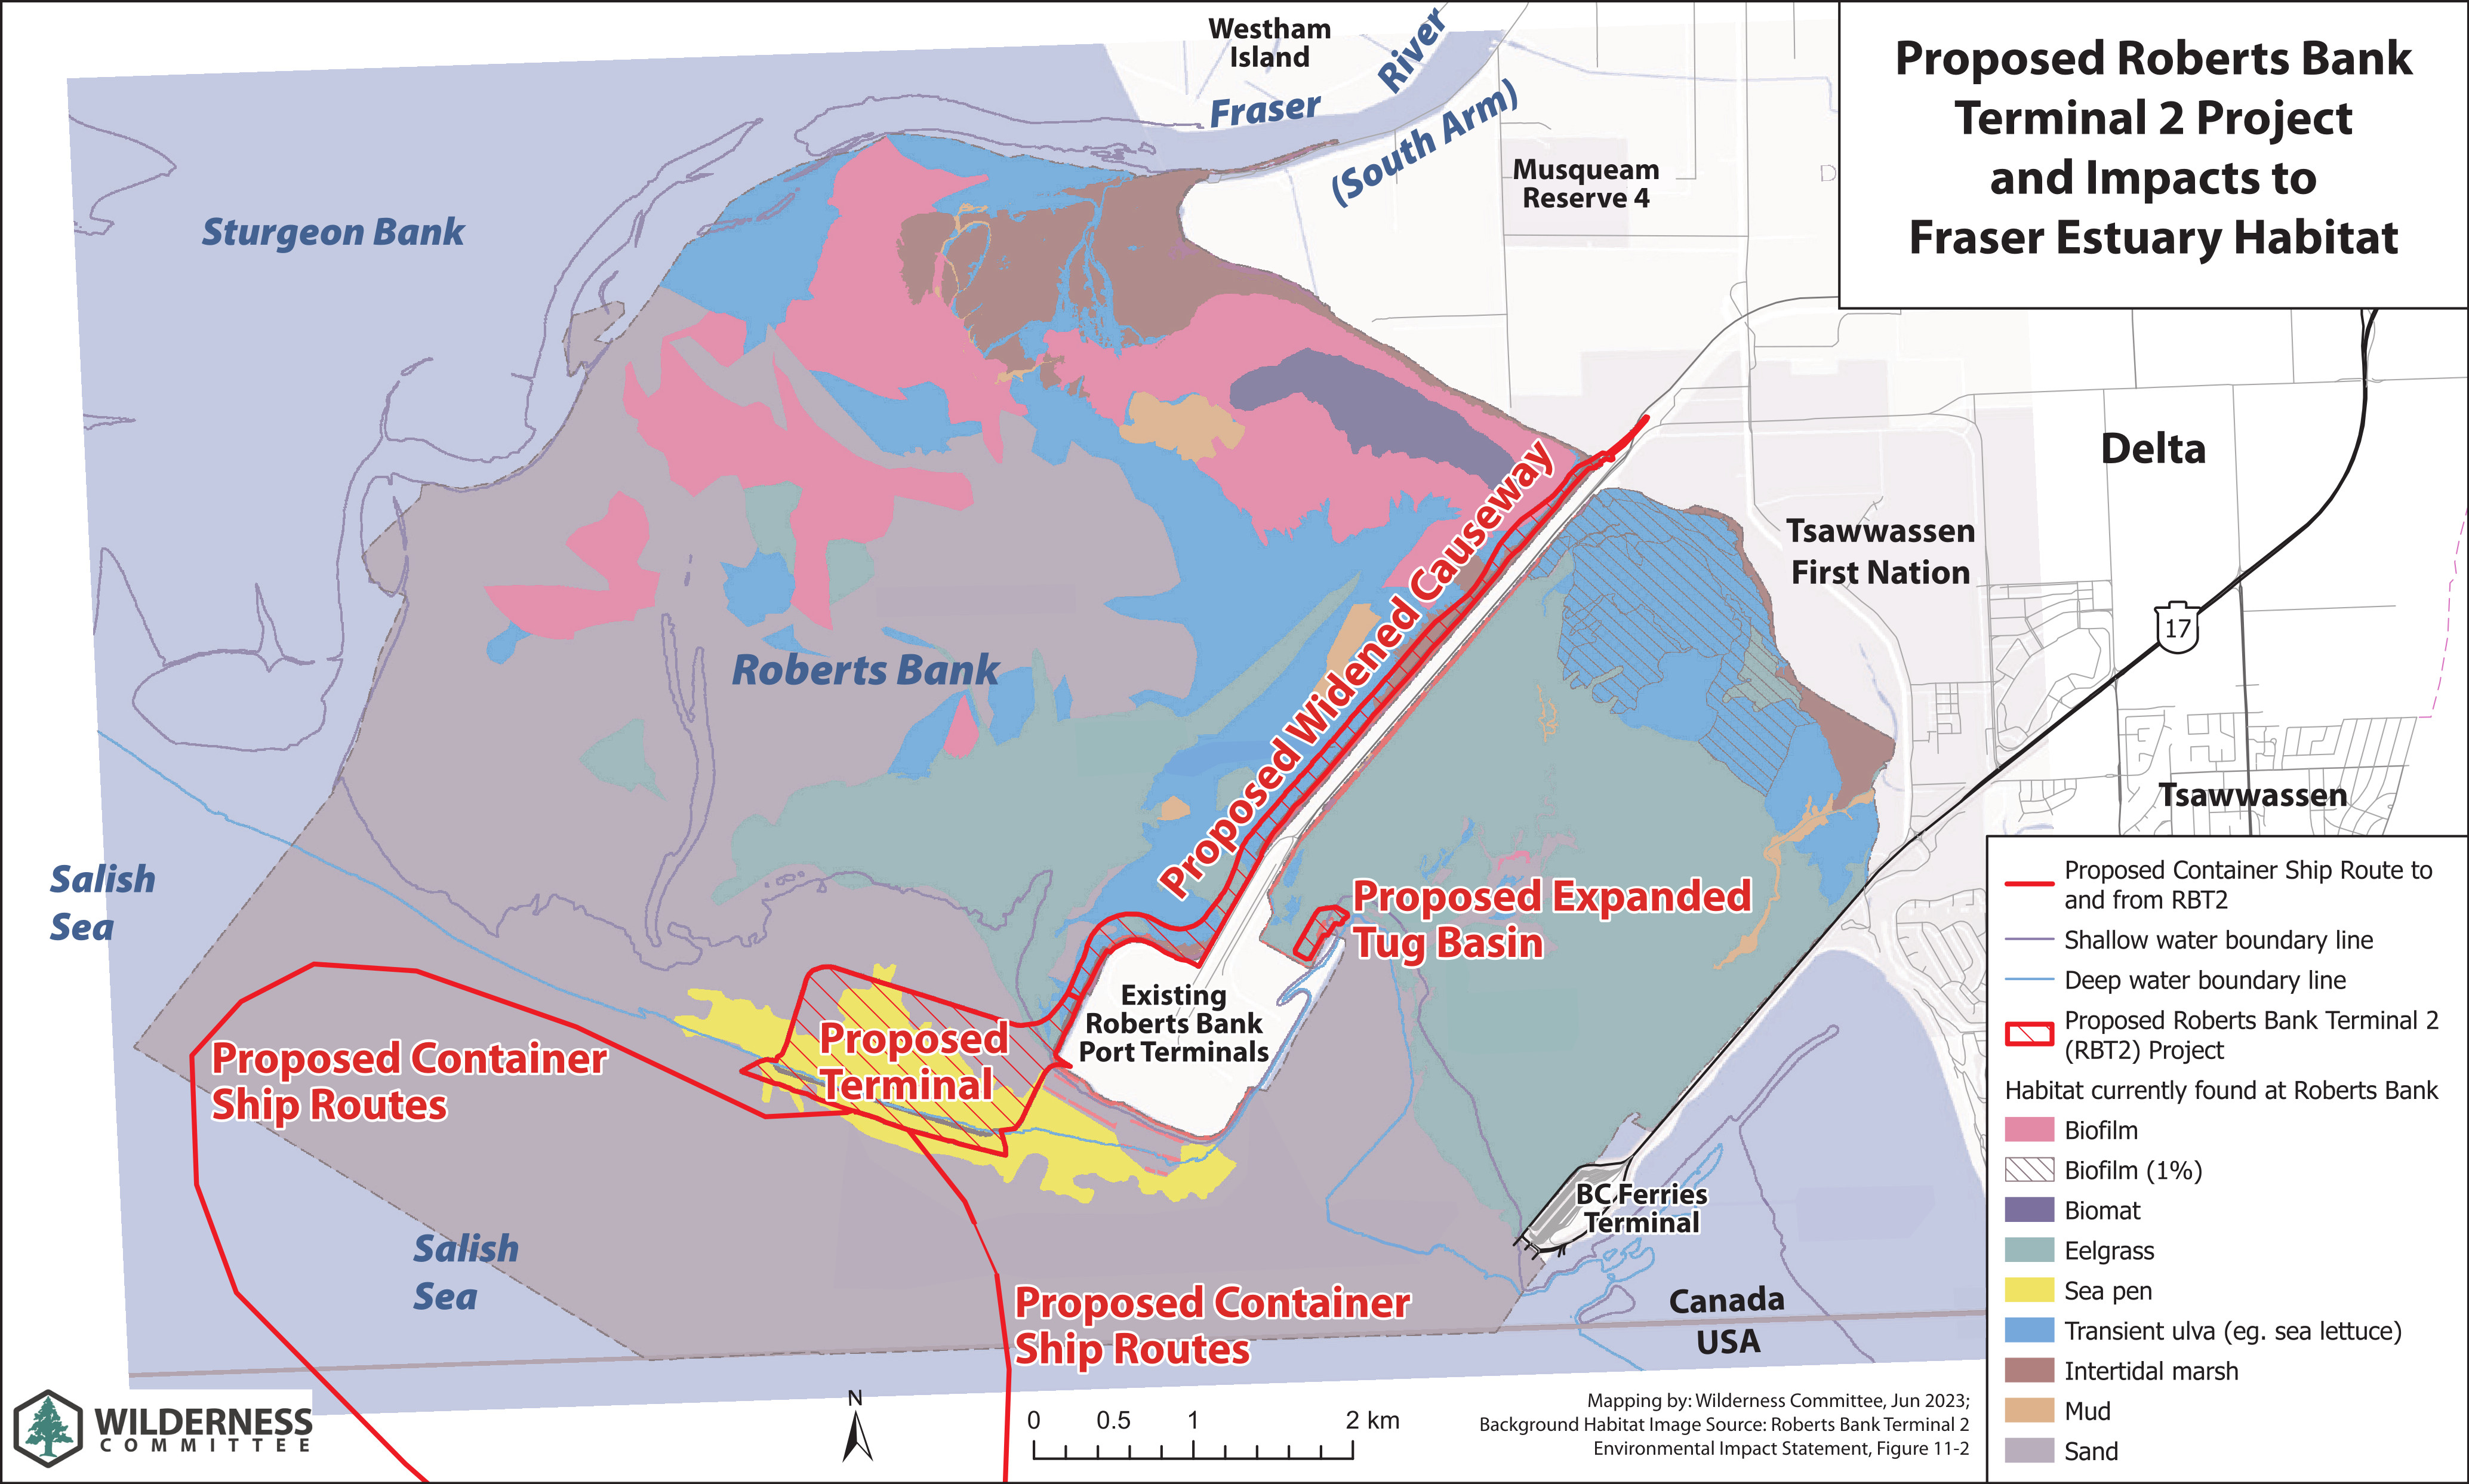 Proposed Roberts Bank Terminal 2 and Impacts to Fraser Estuary Habitat Map